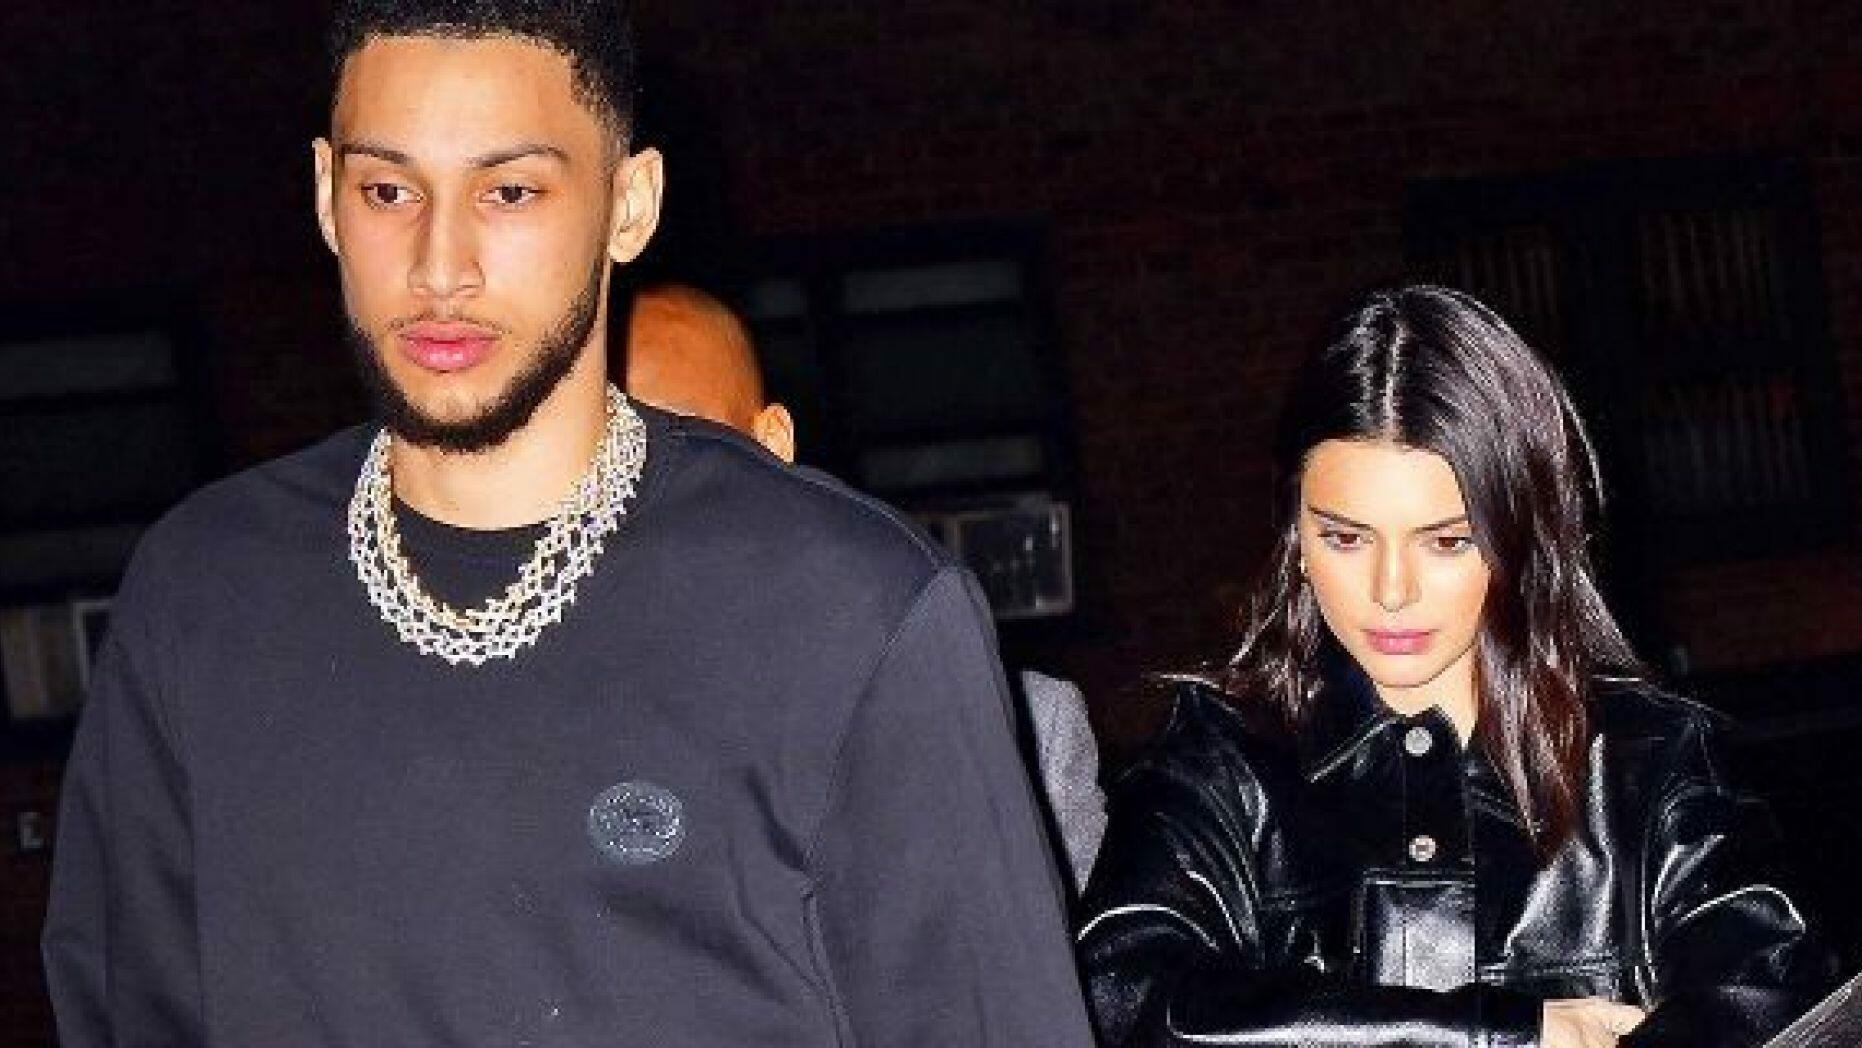 Kendall Jenner Is Trying to Get Philadelphia Sixers' Ben Simmons Back - Thumbnail Image